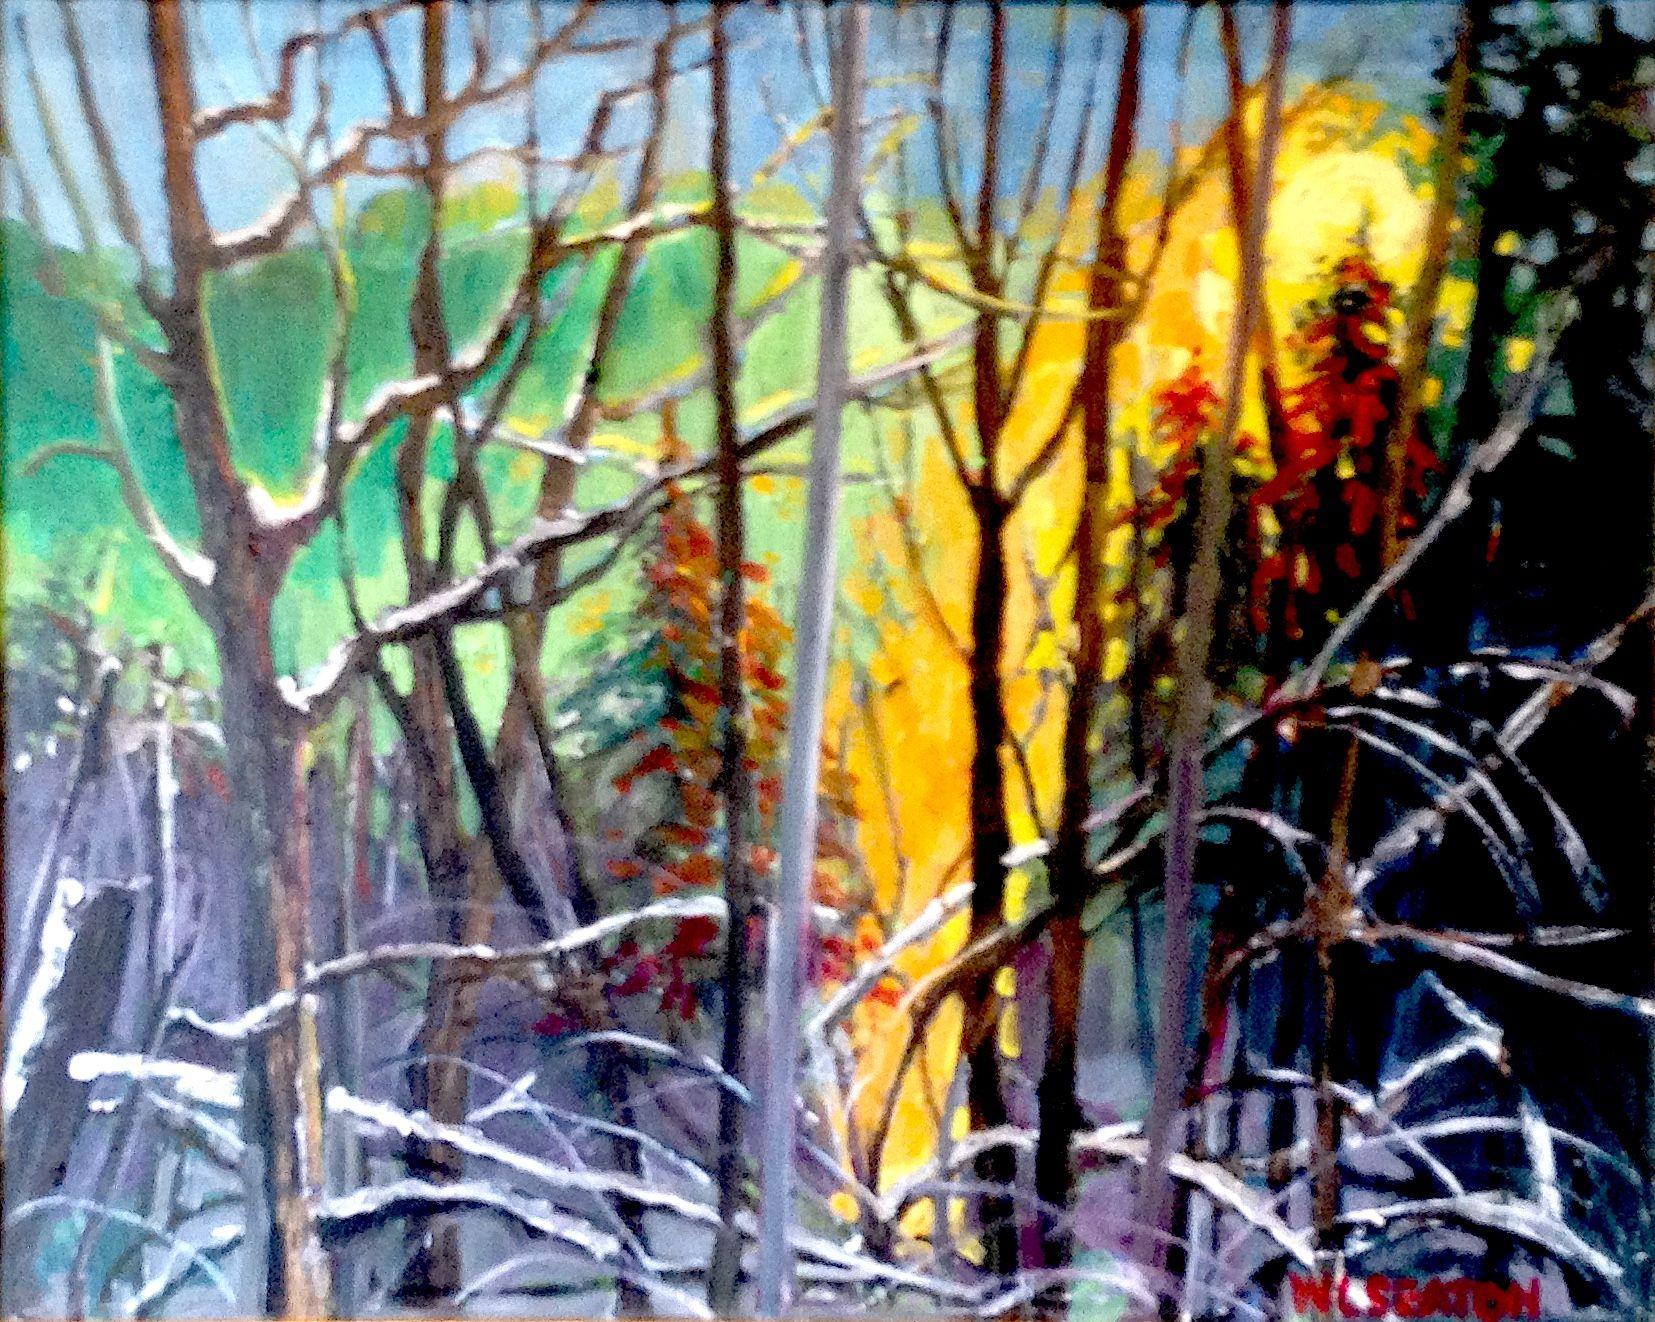 EVER PAINTING HAS A STORY: As I looked out my son's office window into the wooded ravine behind his house on Cottonwood Drive after a freezing rain hours earlier than showed the sun dancing on the frozen branches, using my iPhone captured the moment